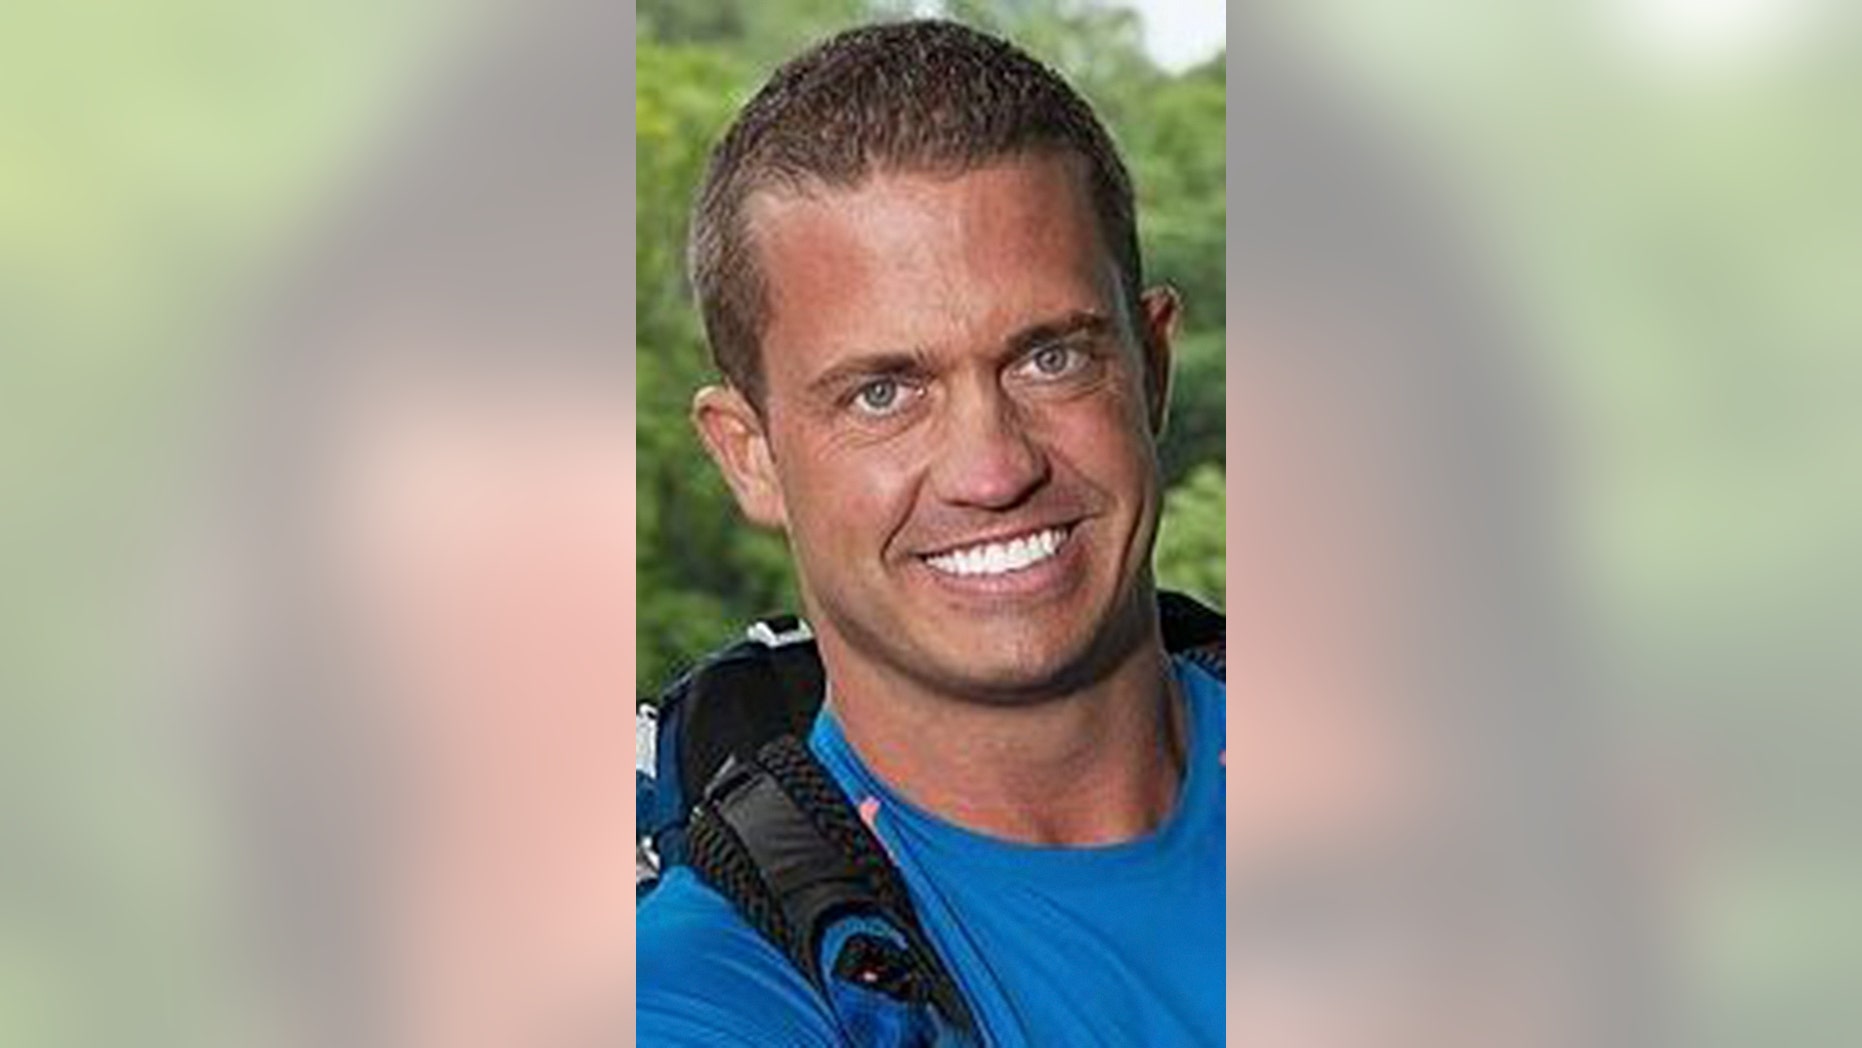 Jim Raman, an orthodontist who also participated in "Amazing Race" in 2014, died Monday at his home in South Carolina.